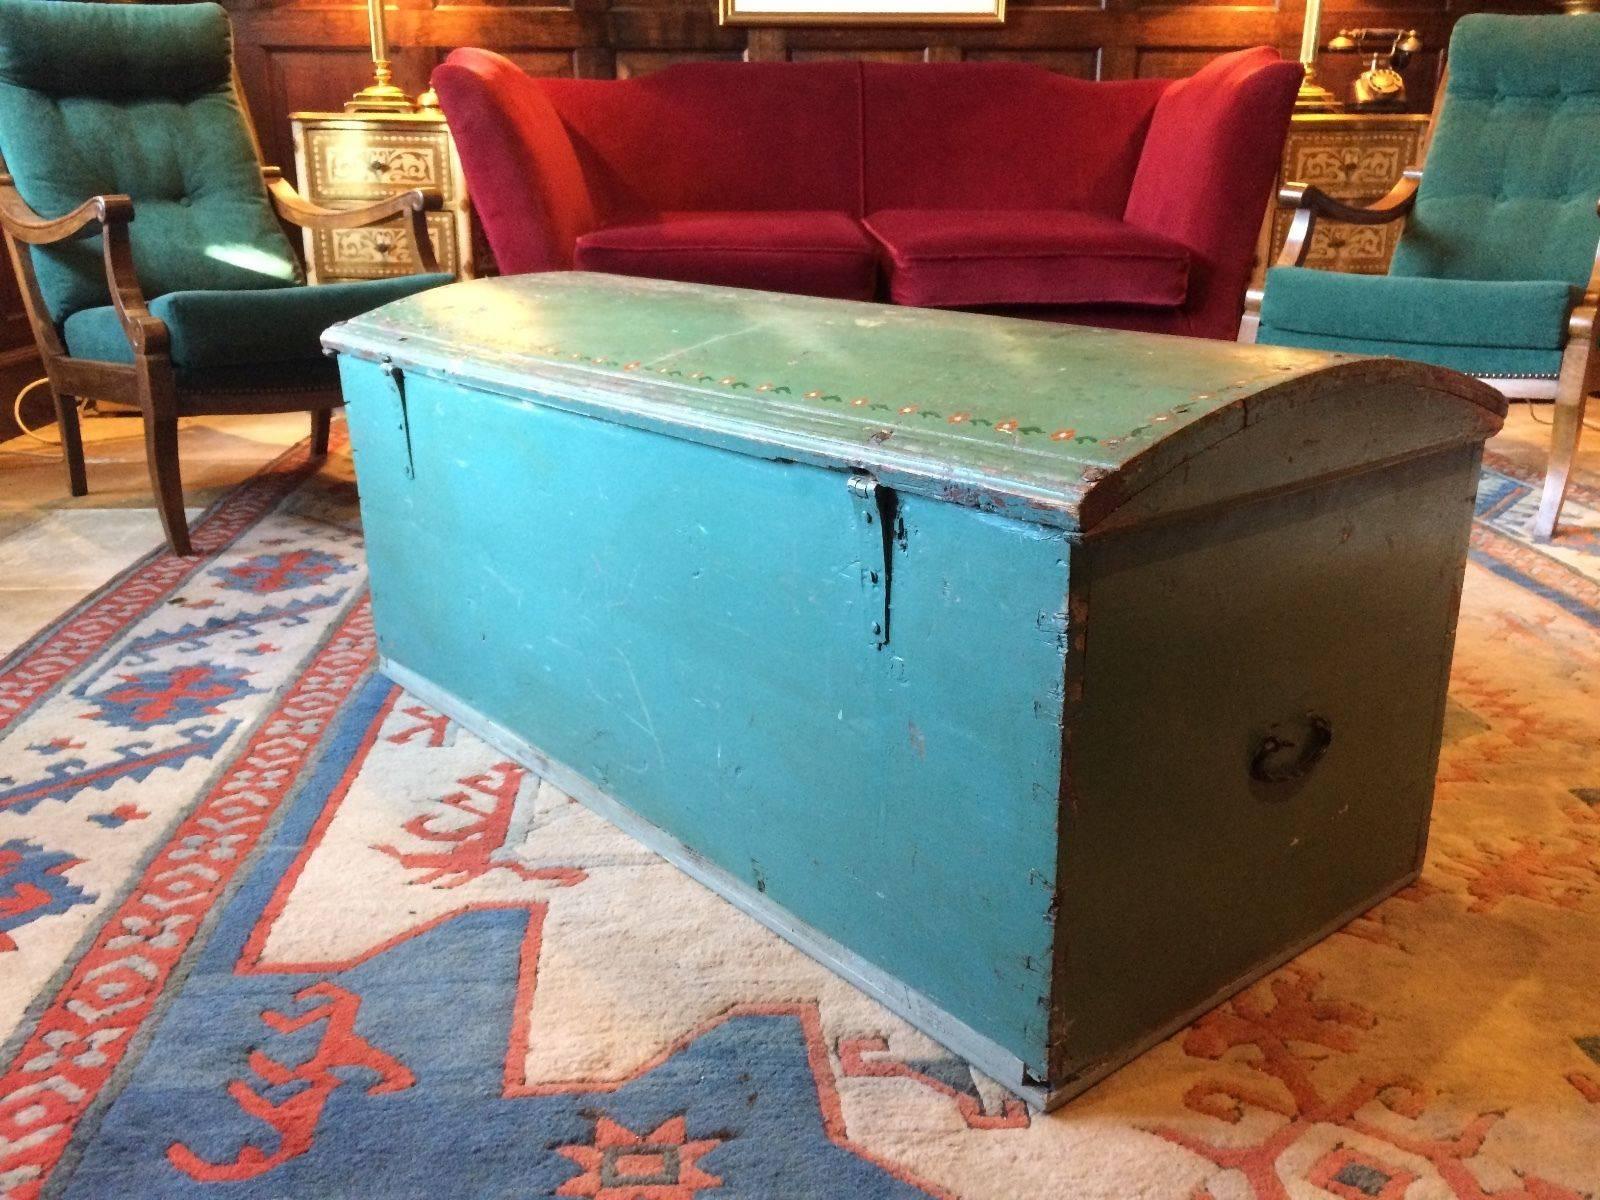 A beautiful and original antique early 19th century (George III era) Scandinavian green painted pine dome topped blanket box with painted floral decoration, monogrammed with the initials JCD and dated 1835, the domed top opens and closes easily with